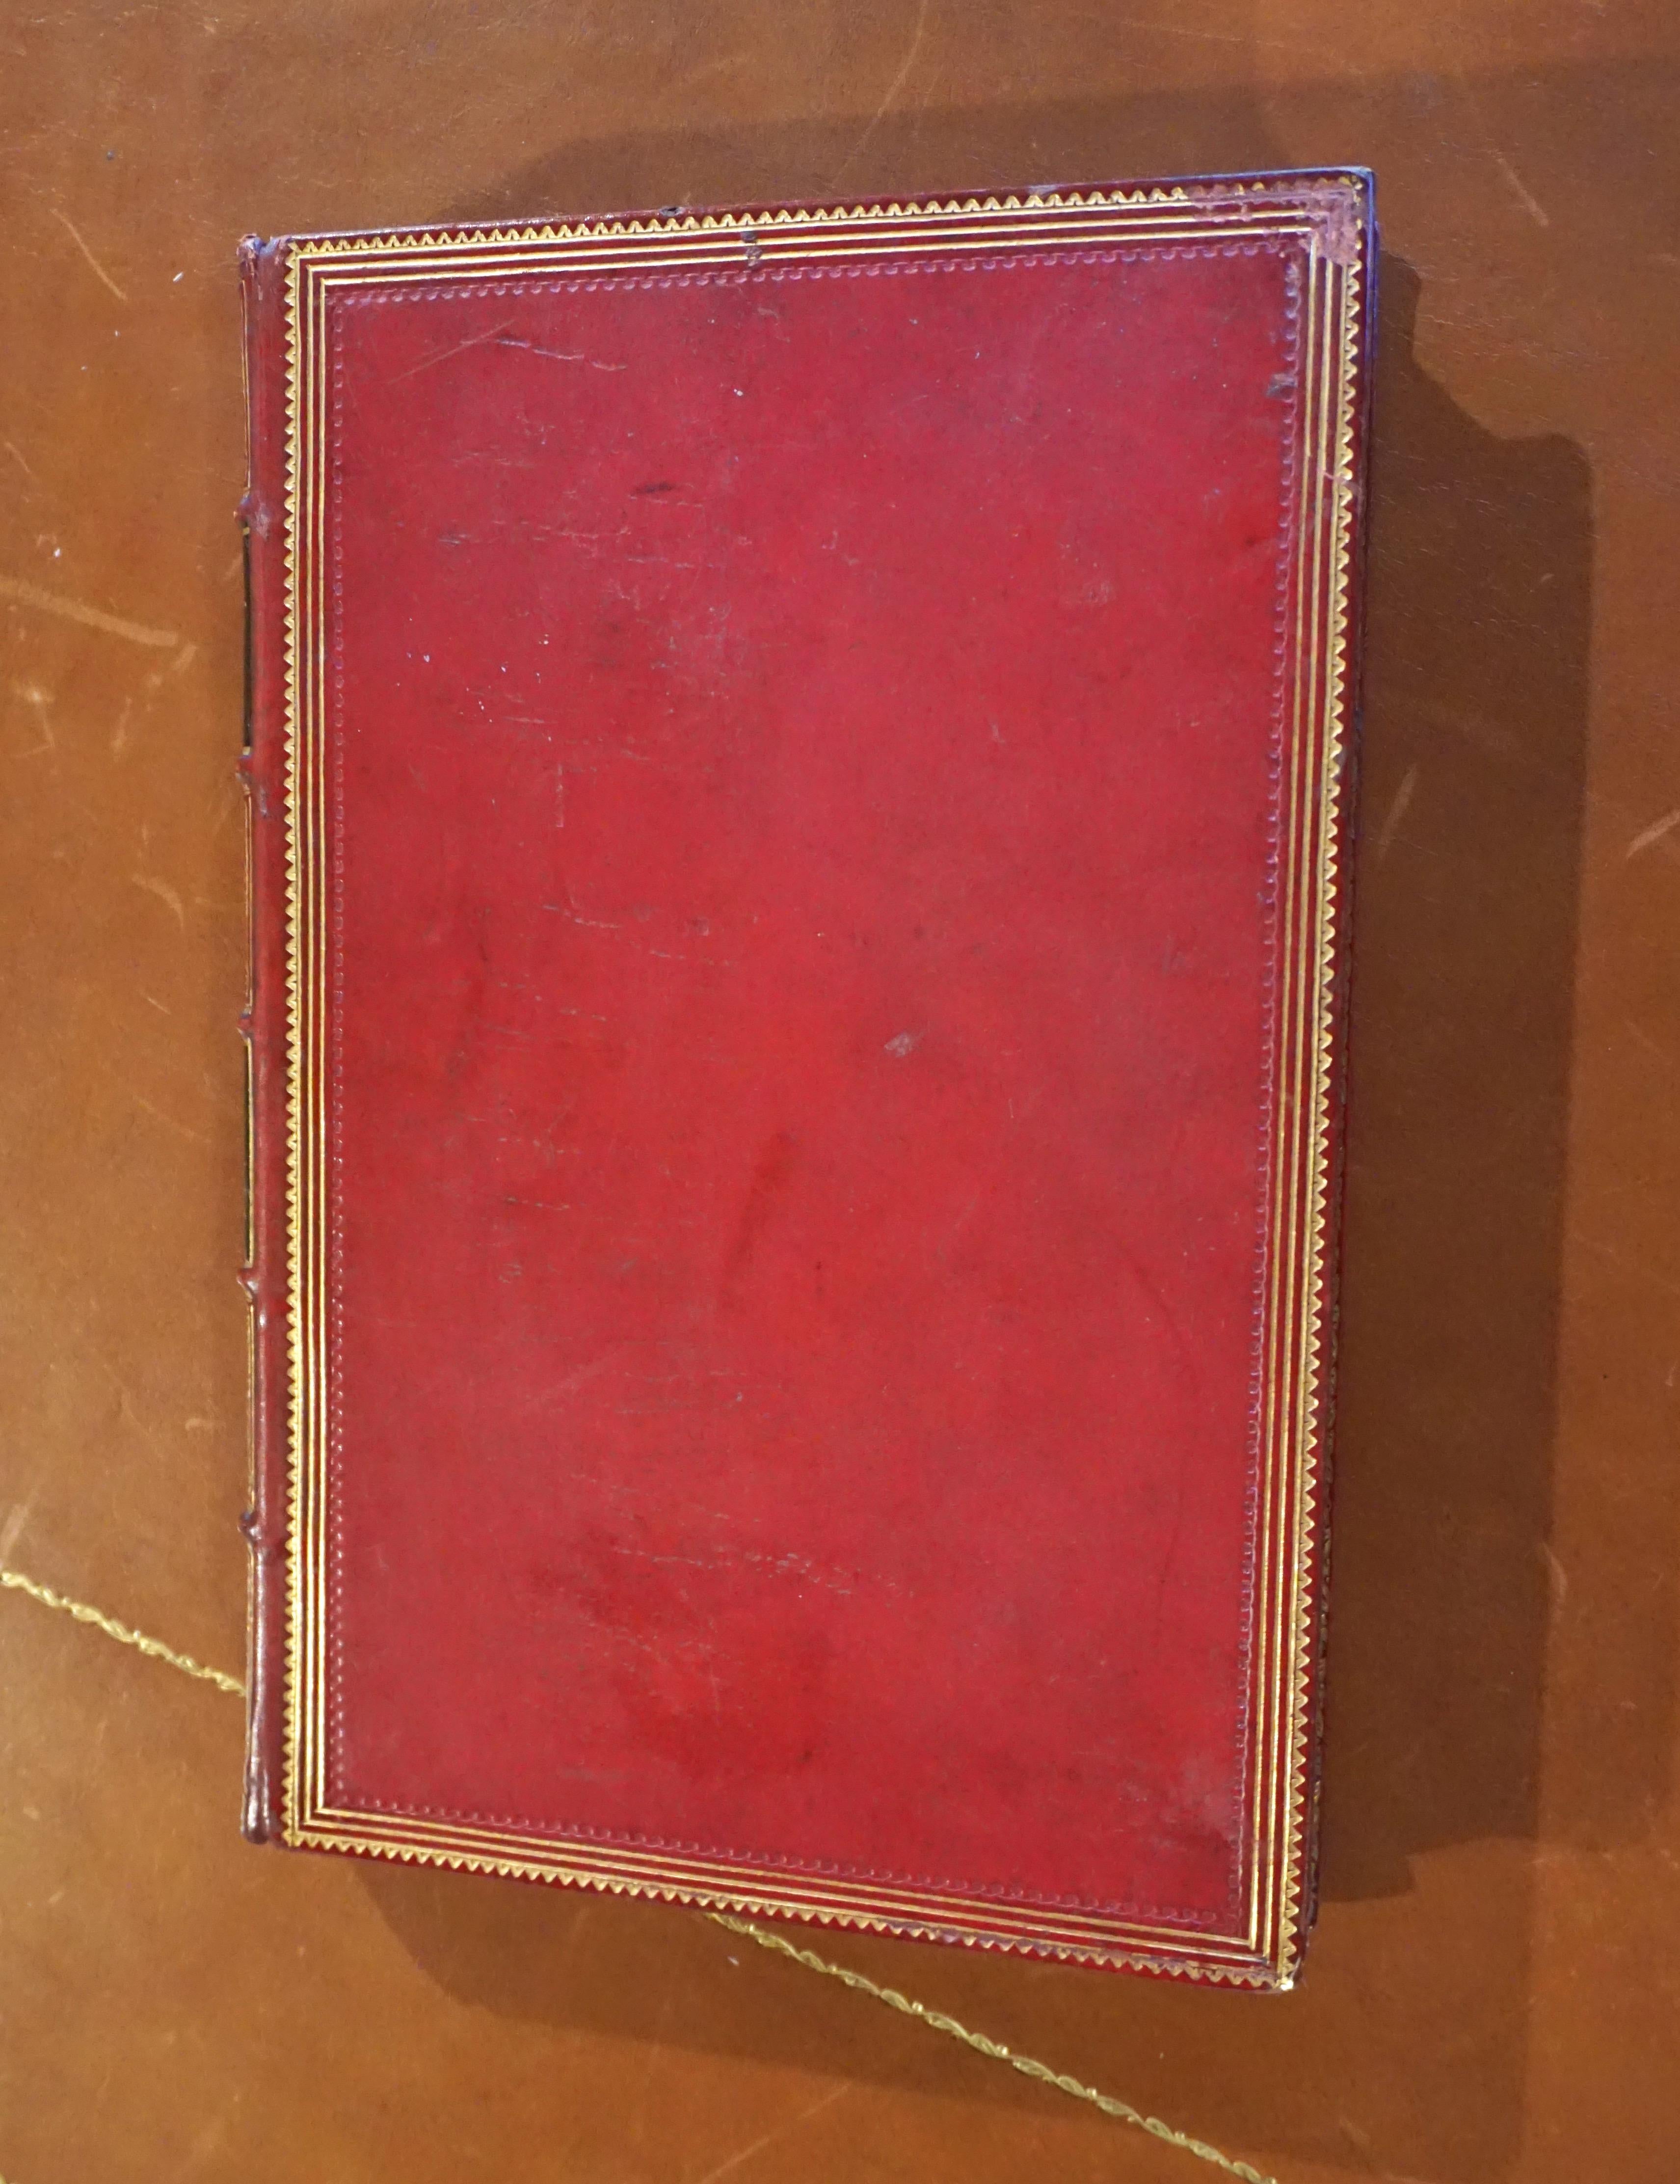 A beautiful 8 volume set of Shakespeare's works bound in full crimson leather with gilt-tooled raised band spines, profusely illustrated with line drawings, published in London by Charles Knight and Company. Each volumes has marbleized endpapers and